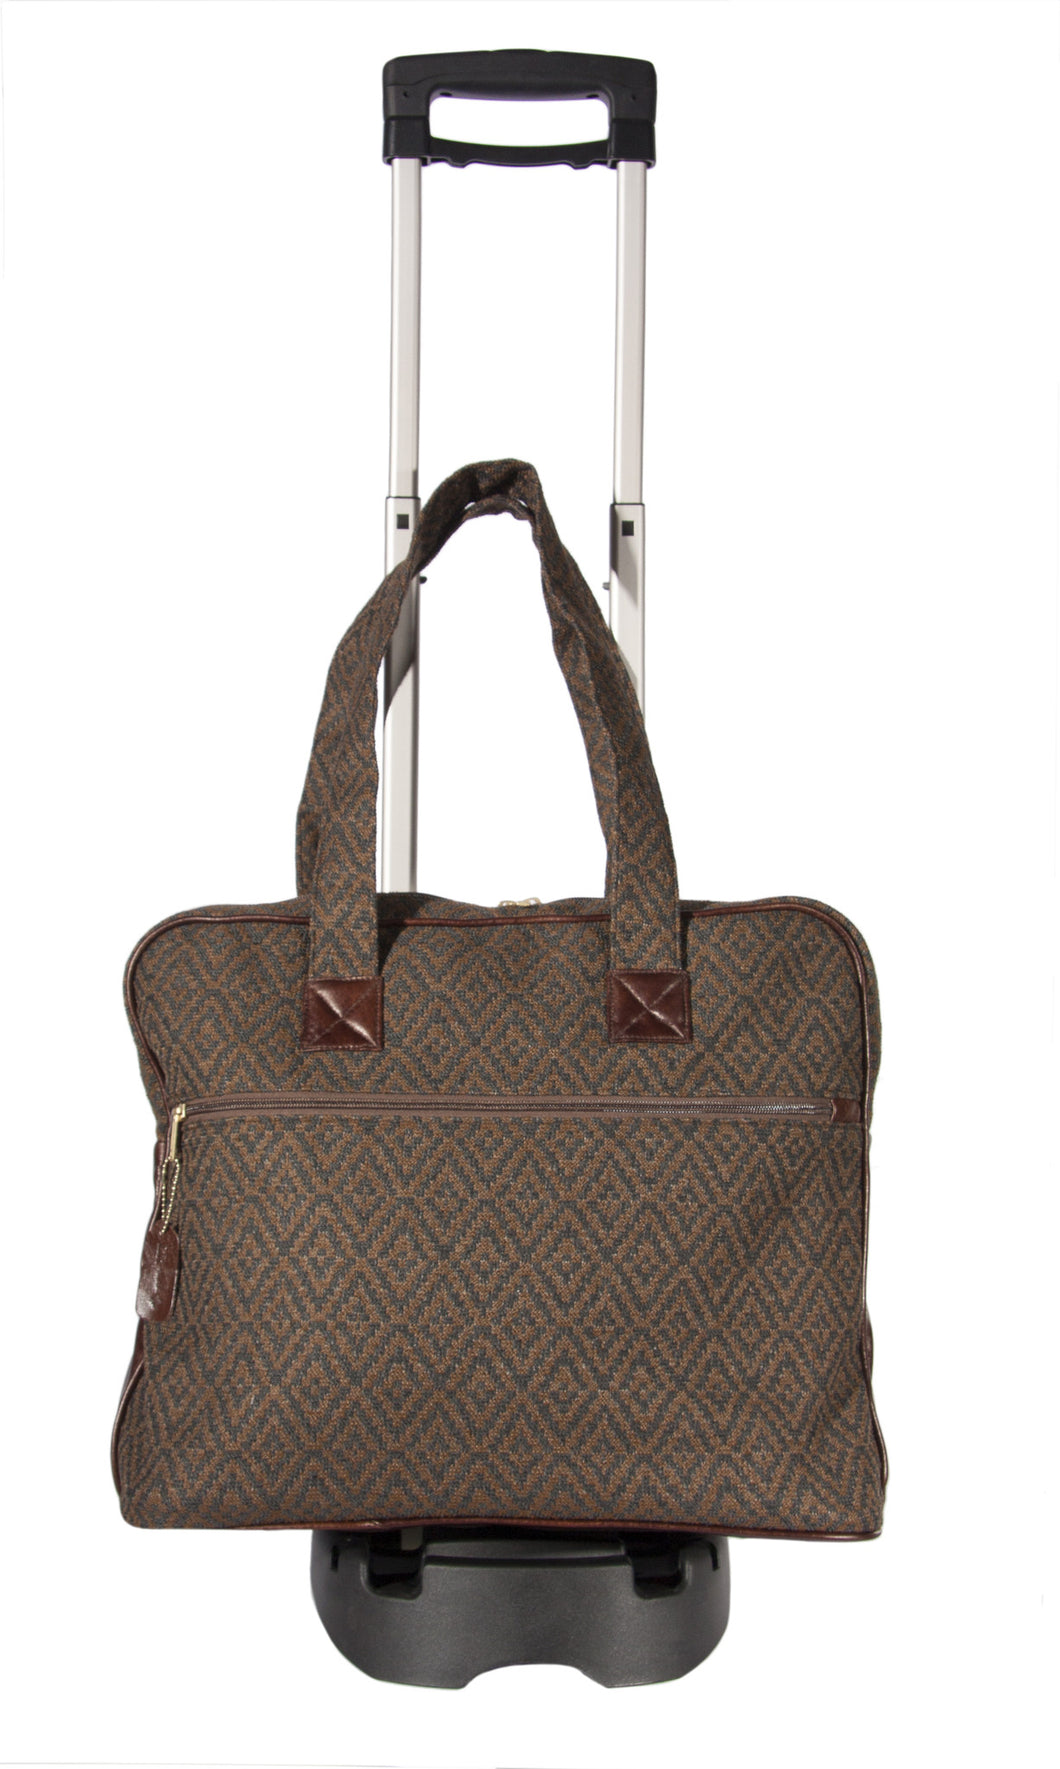 L759-3038 Trolley Tote Rioja Stone w Trolley Cart trimmed w Authentic Leather. Spacious Interior Tote Double Straps and Removable Trolley Cart. Part of the Unbridled Passion, Cosmetic and Travel Collection 10